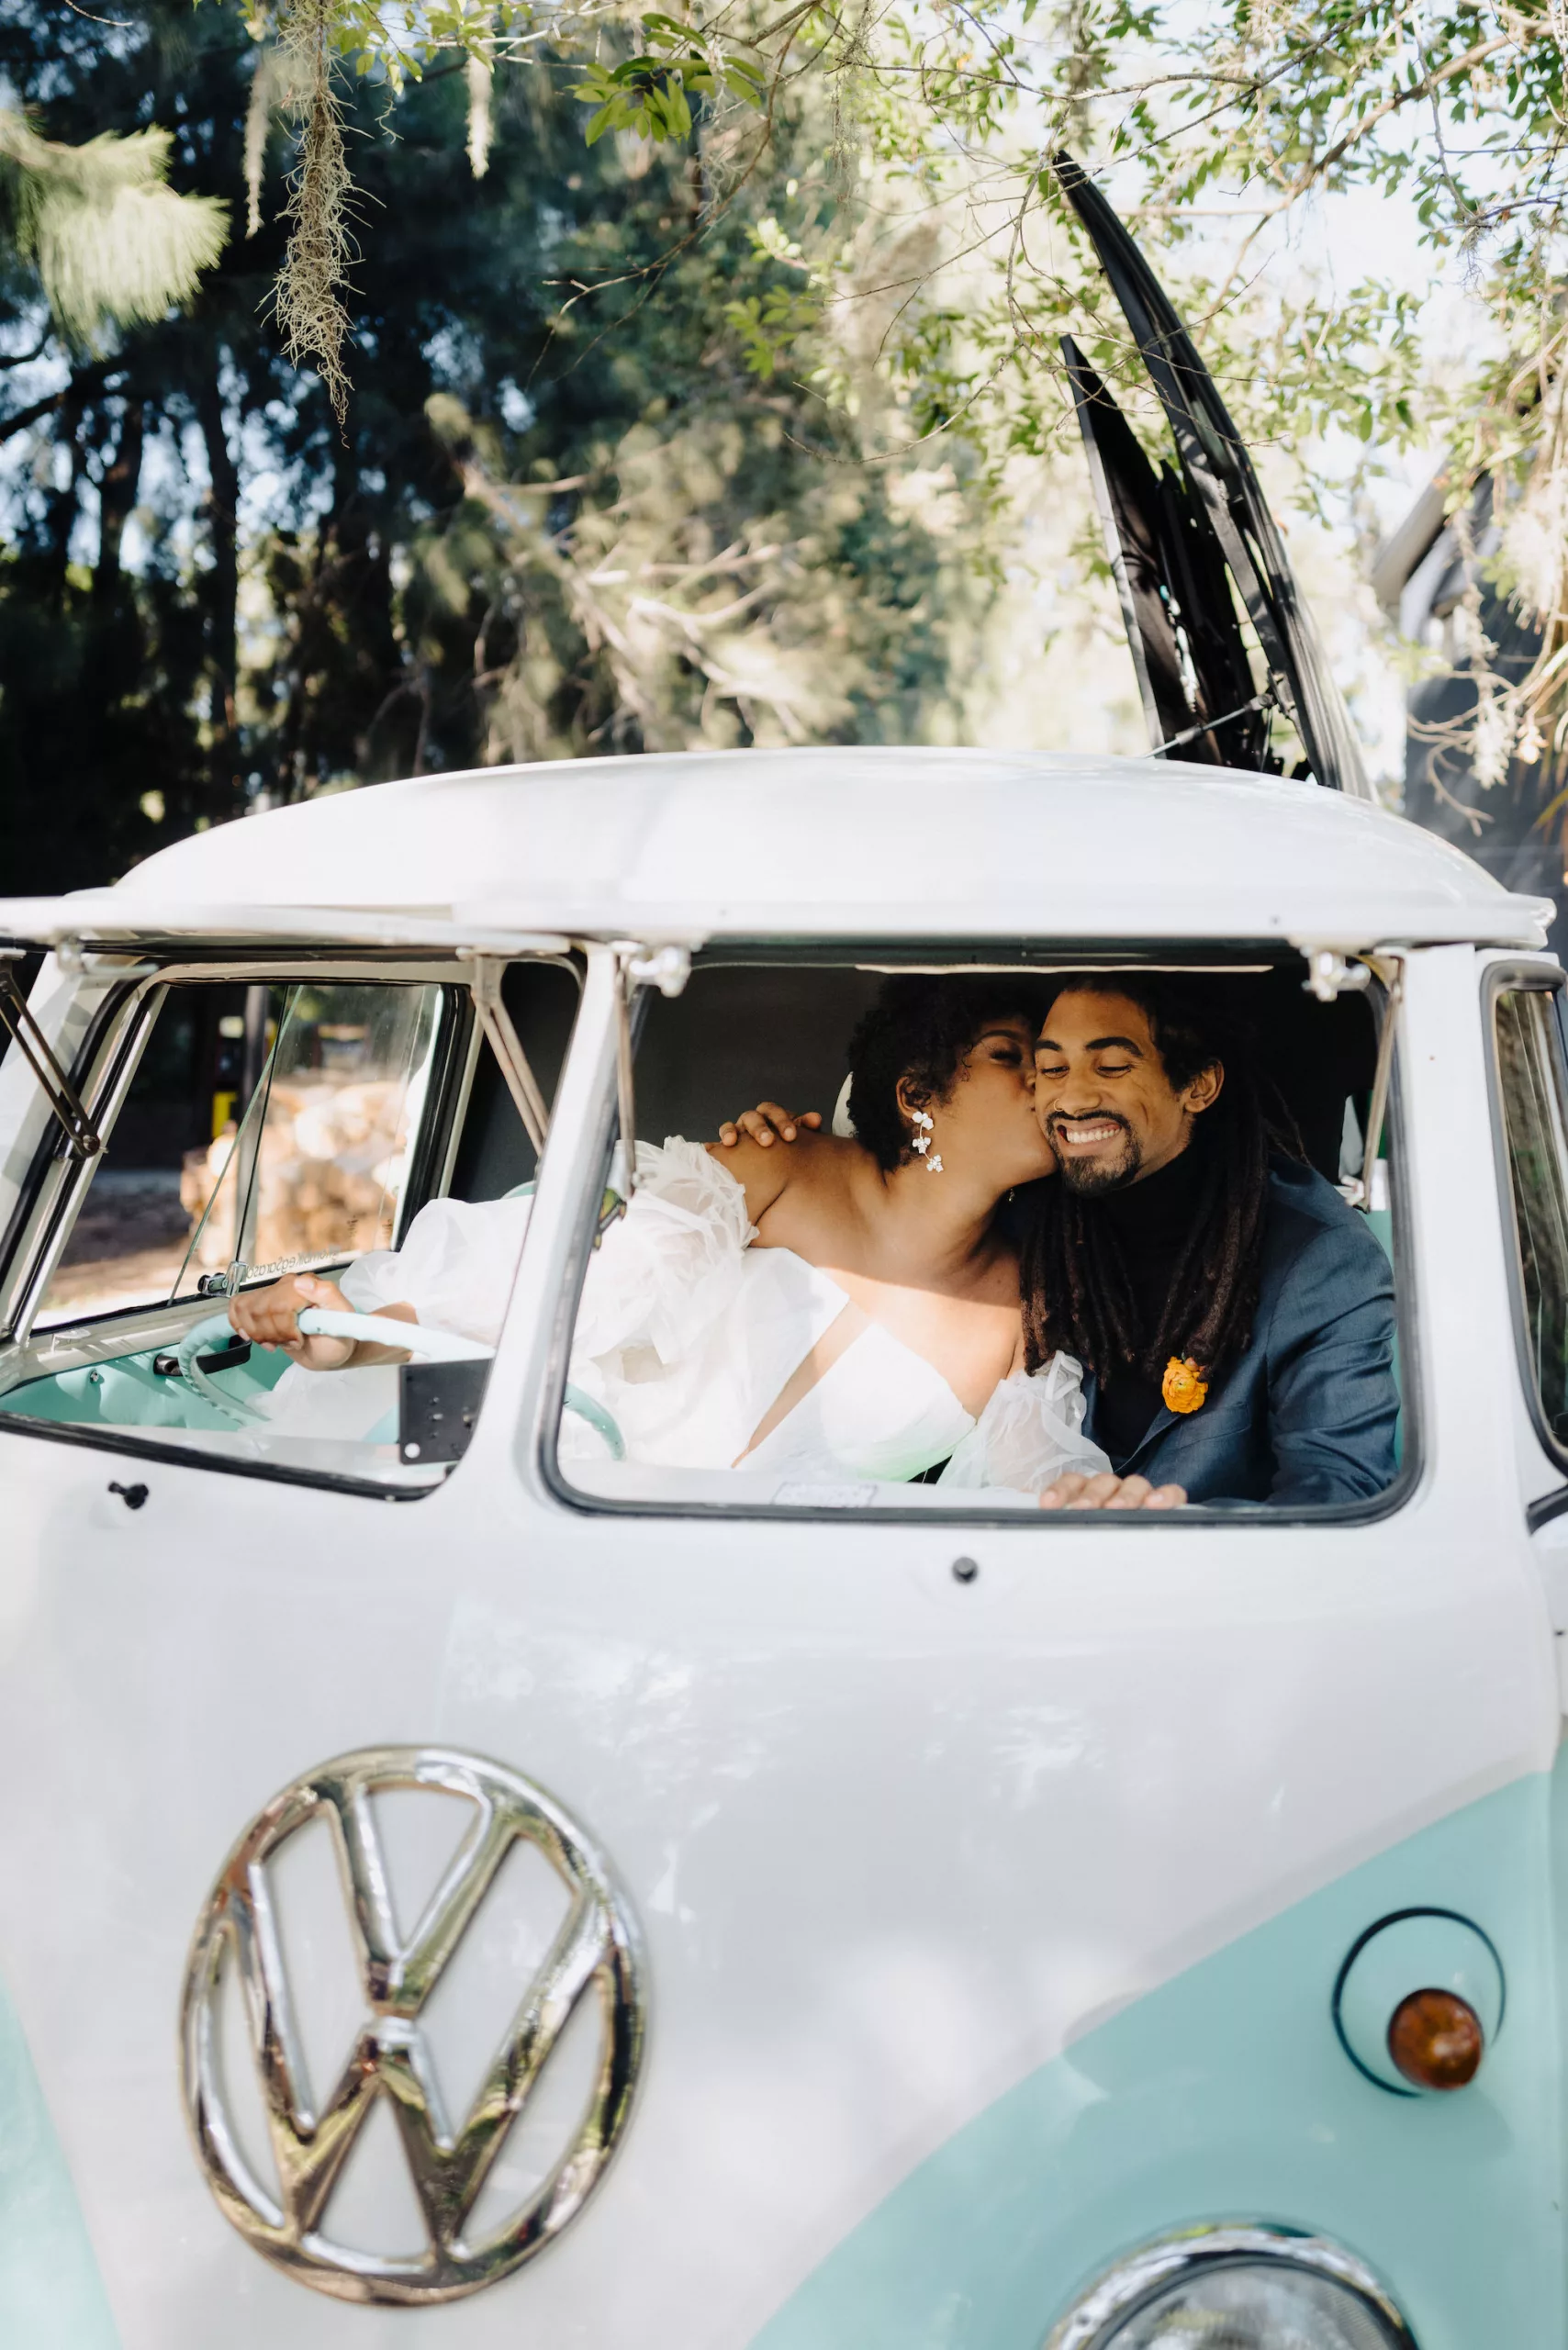 Bride and Groom Volkswagen Bus Photo Op Wedding Portrait | Tampa Bay Photographer McNeile Photography | Content Creator Behind The Vows | Planner Wilder Mind Events